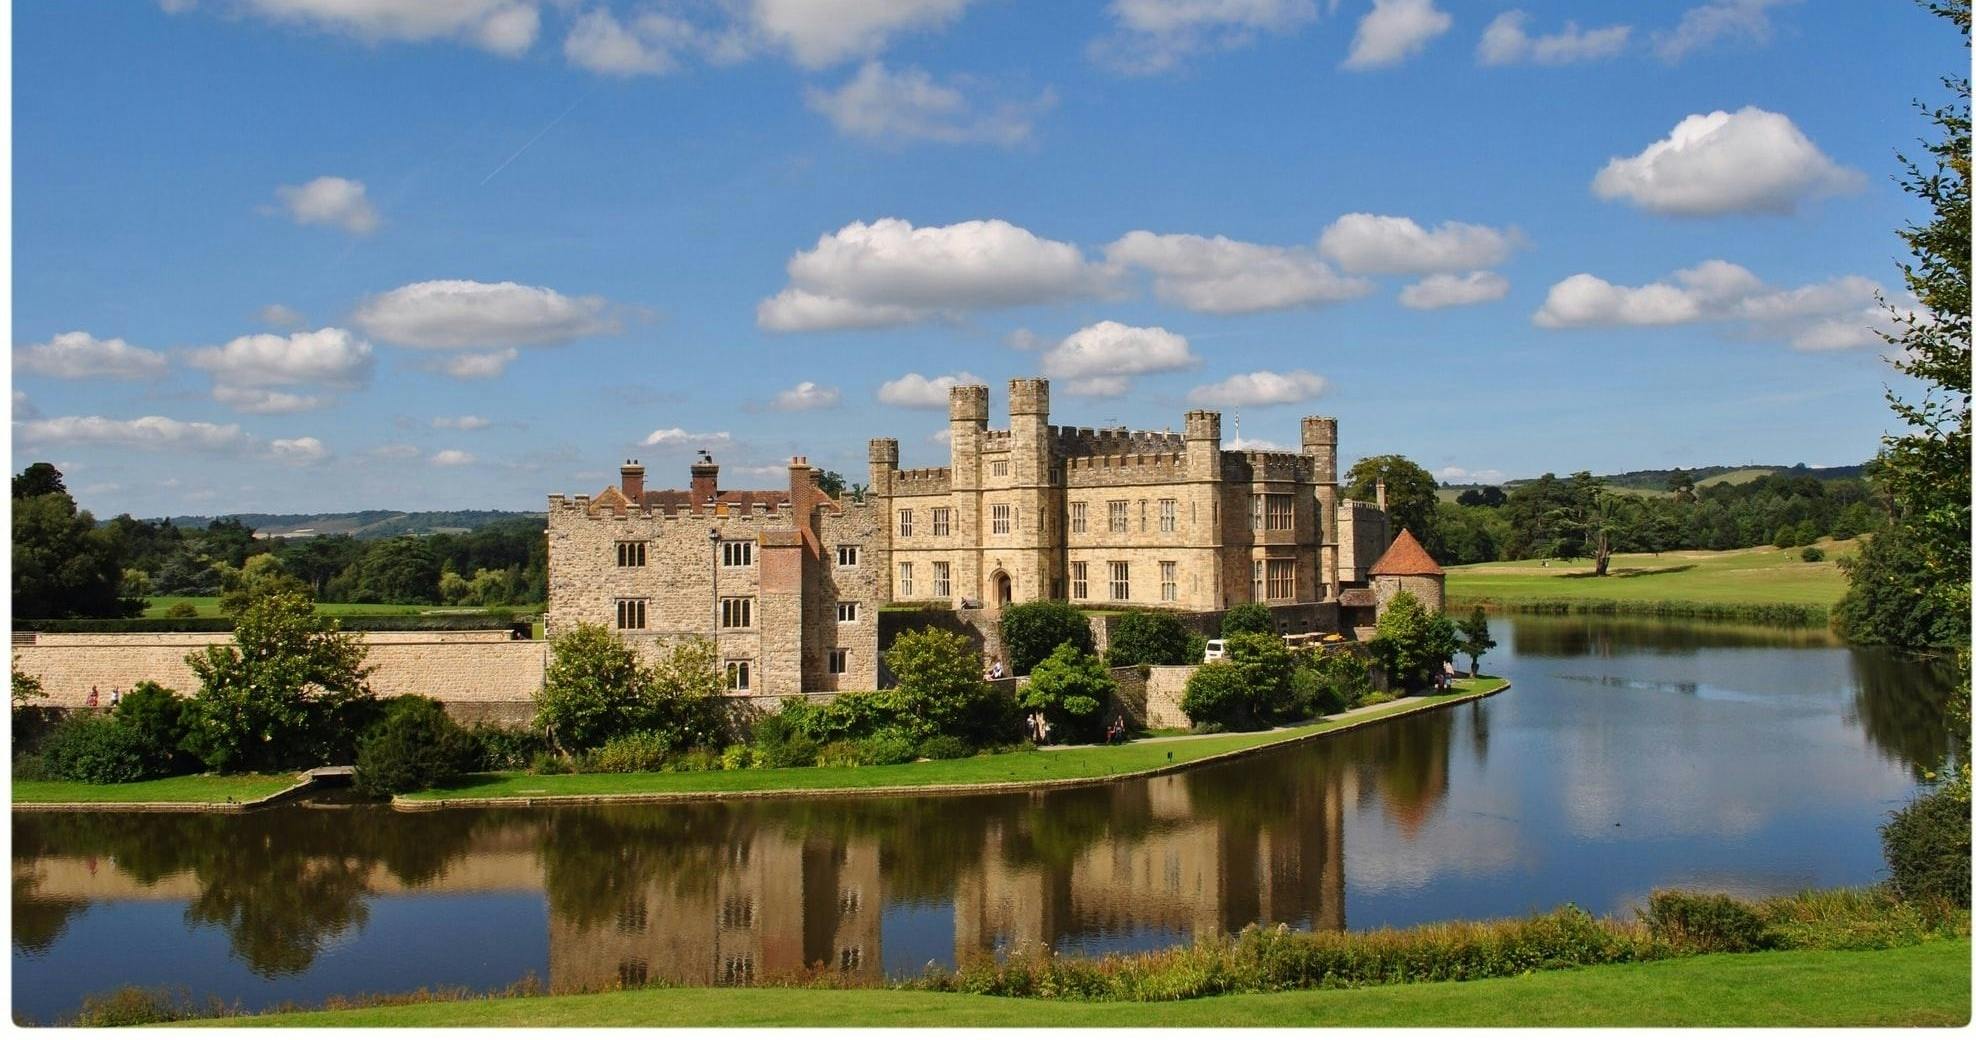 Leeds Castle, Canterbury and White Cliffs of Dover private car group tour